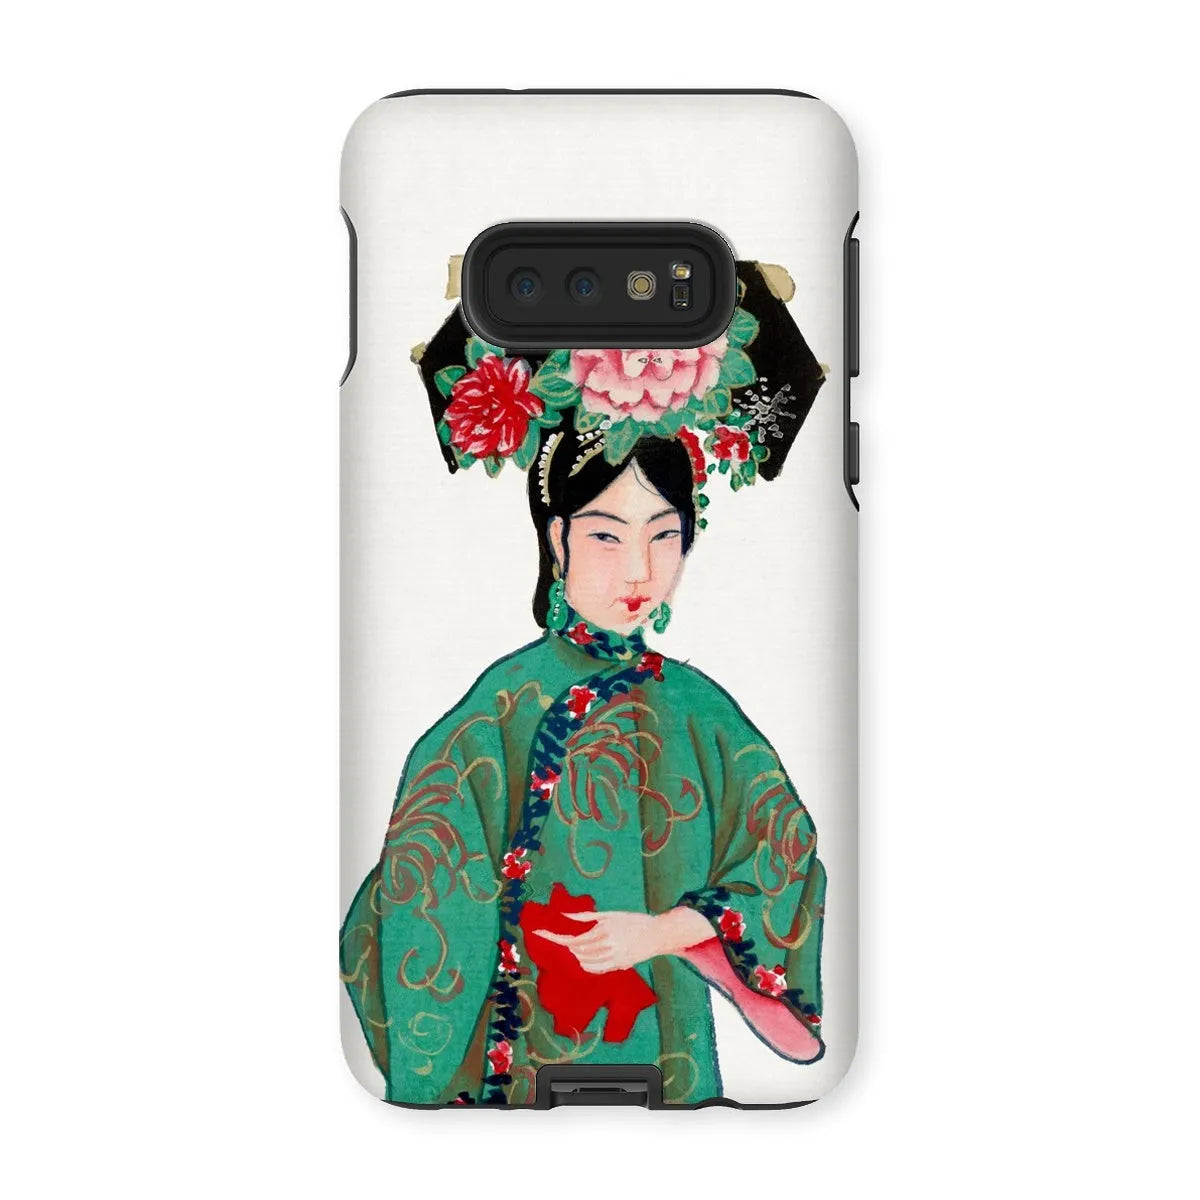 Chinese Noblewoman In Manchu Couture Art Phone Case - Samsung Galaxy S10e / Matte - Mobile Phone Cases - Aesthetic Art